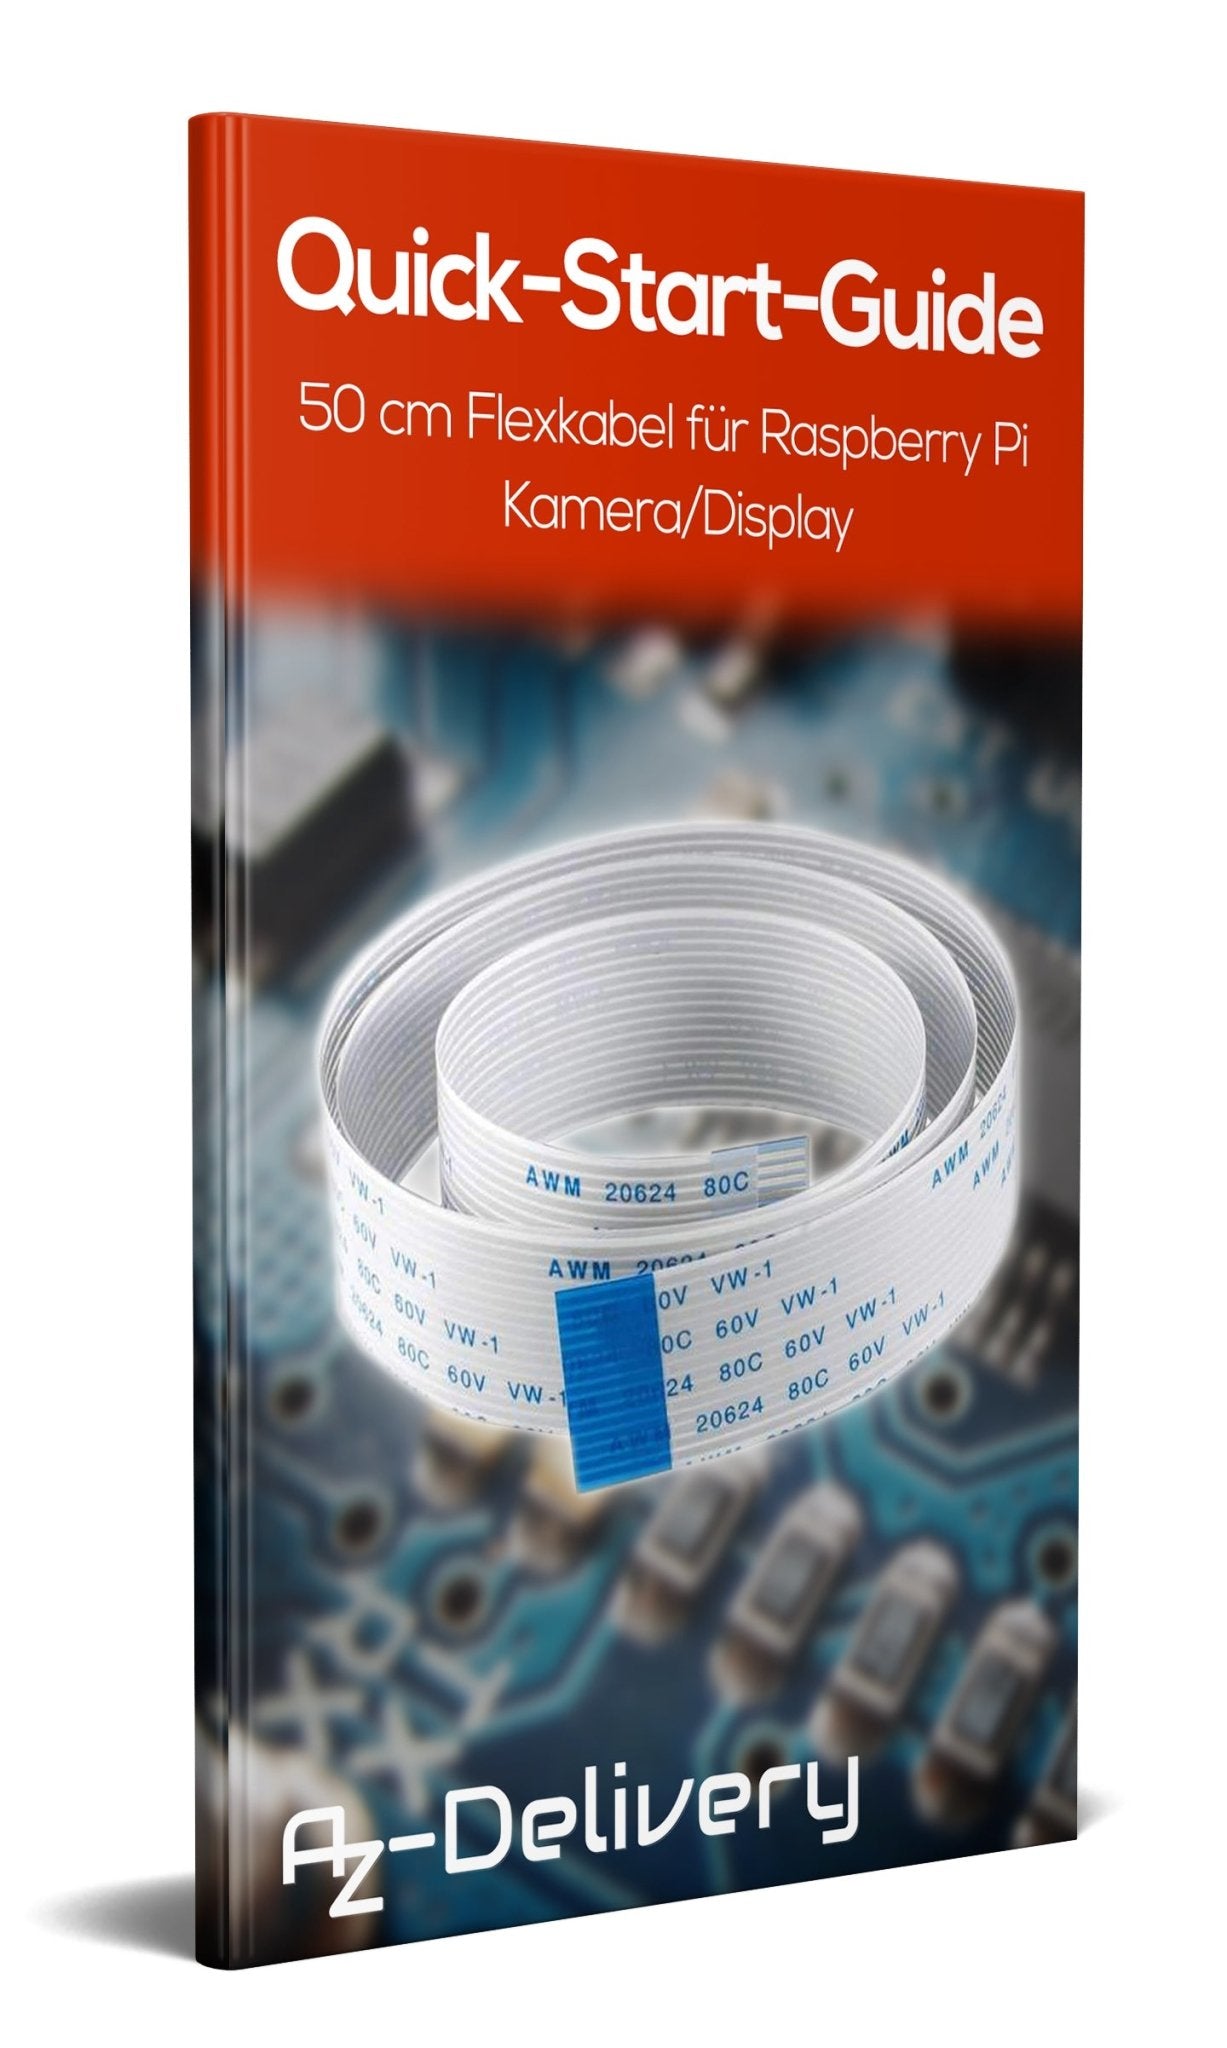 50 cm replacement flex cable for Raspberry Pi camera/display